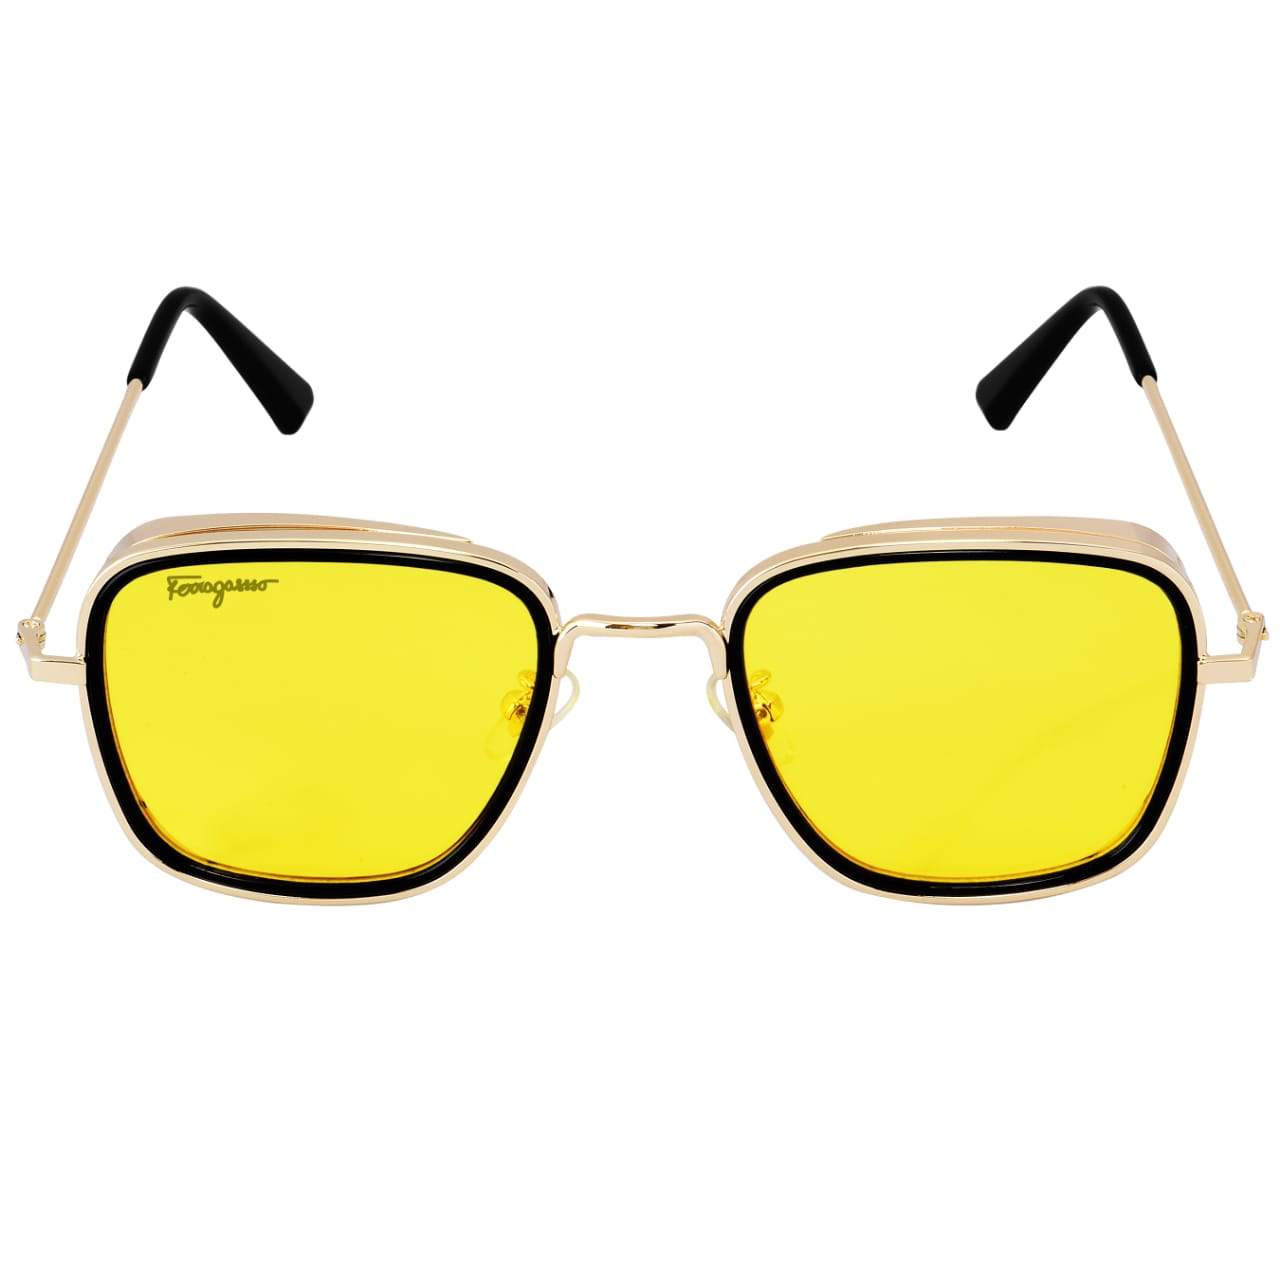 Stylish Square Yellow Candy Sunglasses For Men And Women-Unique and Classy